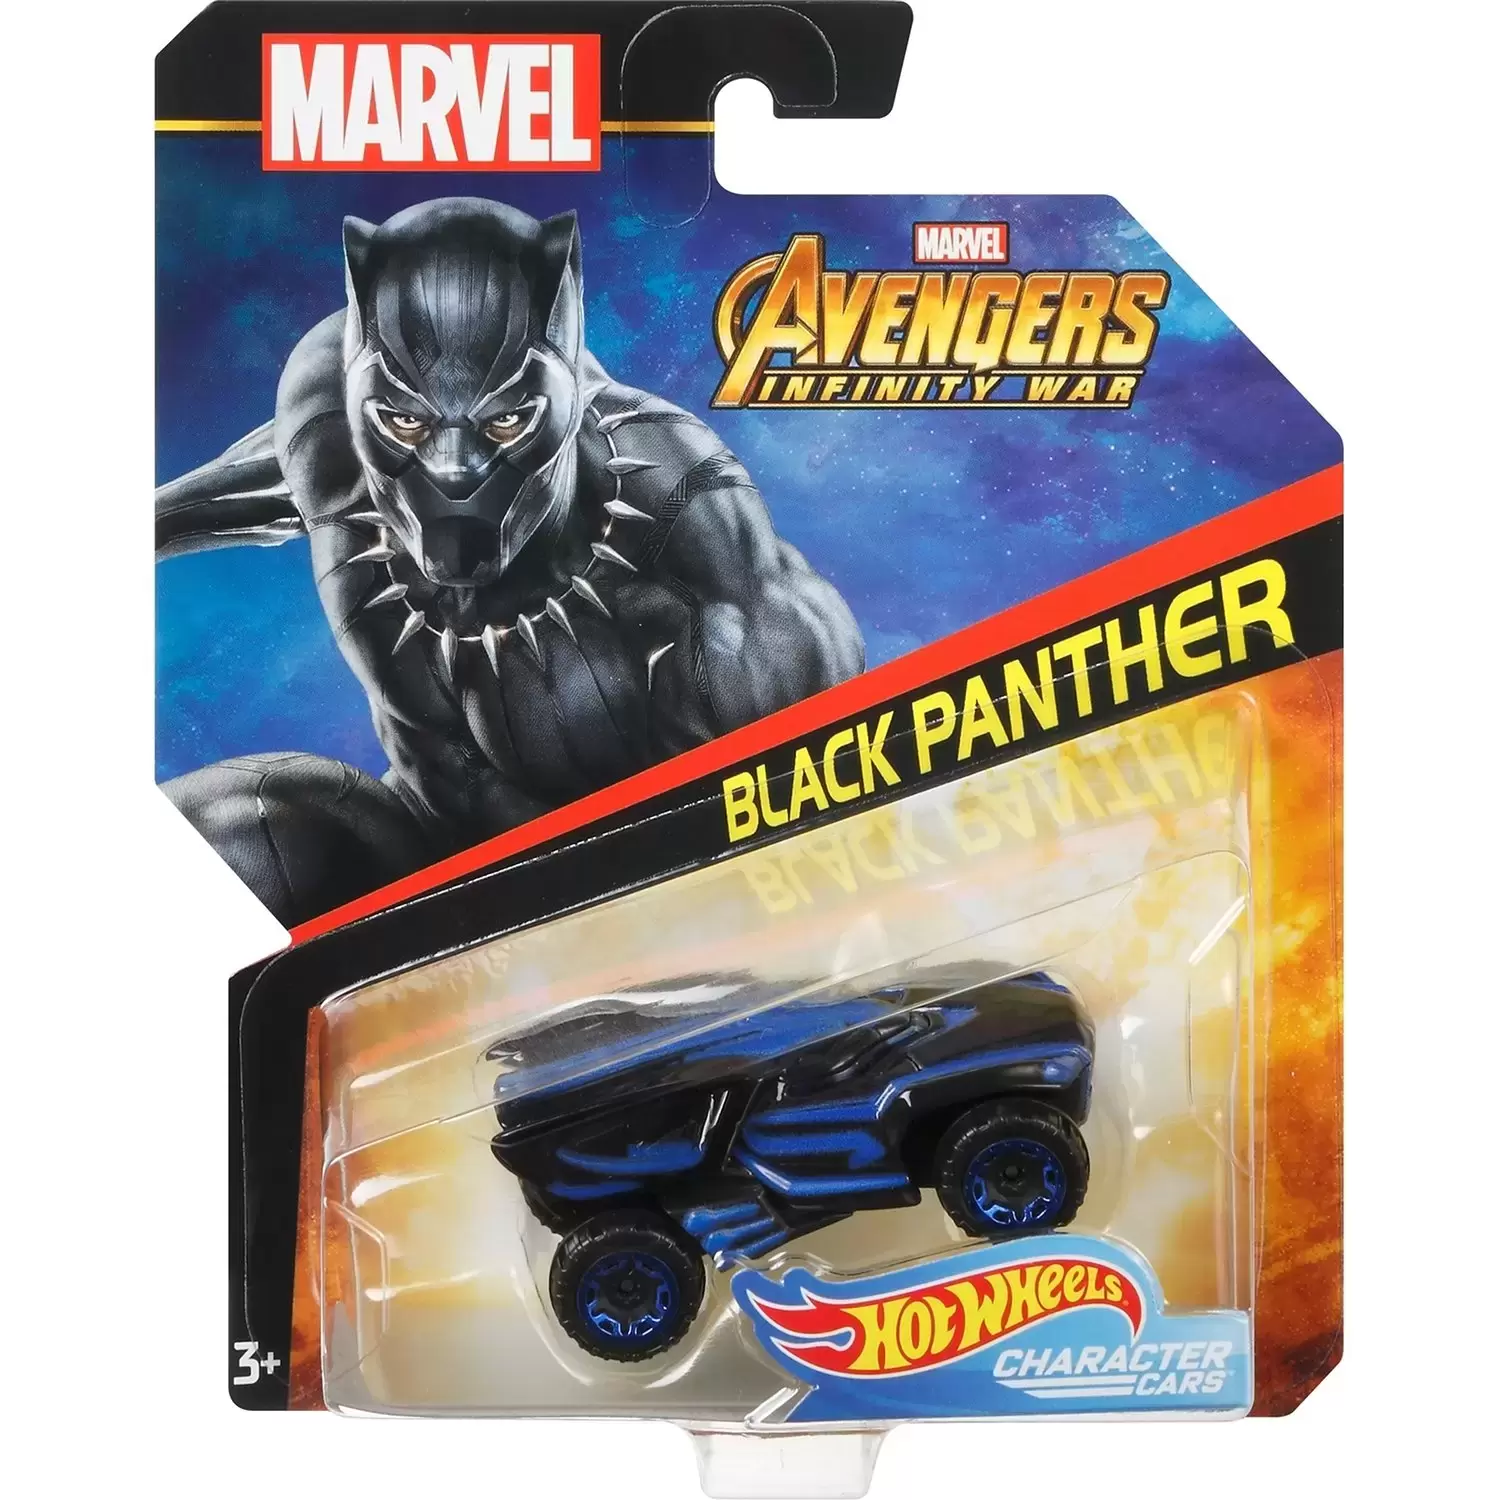 Marvel Character Cars - Avengers Infinity Wars - Black Panther